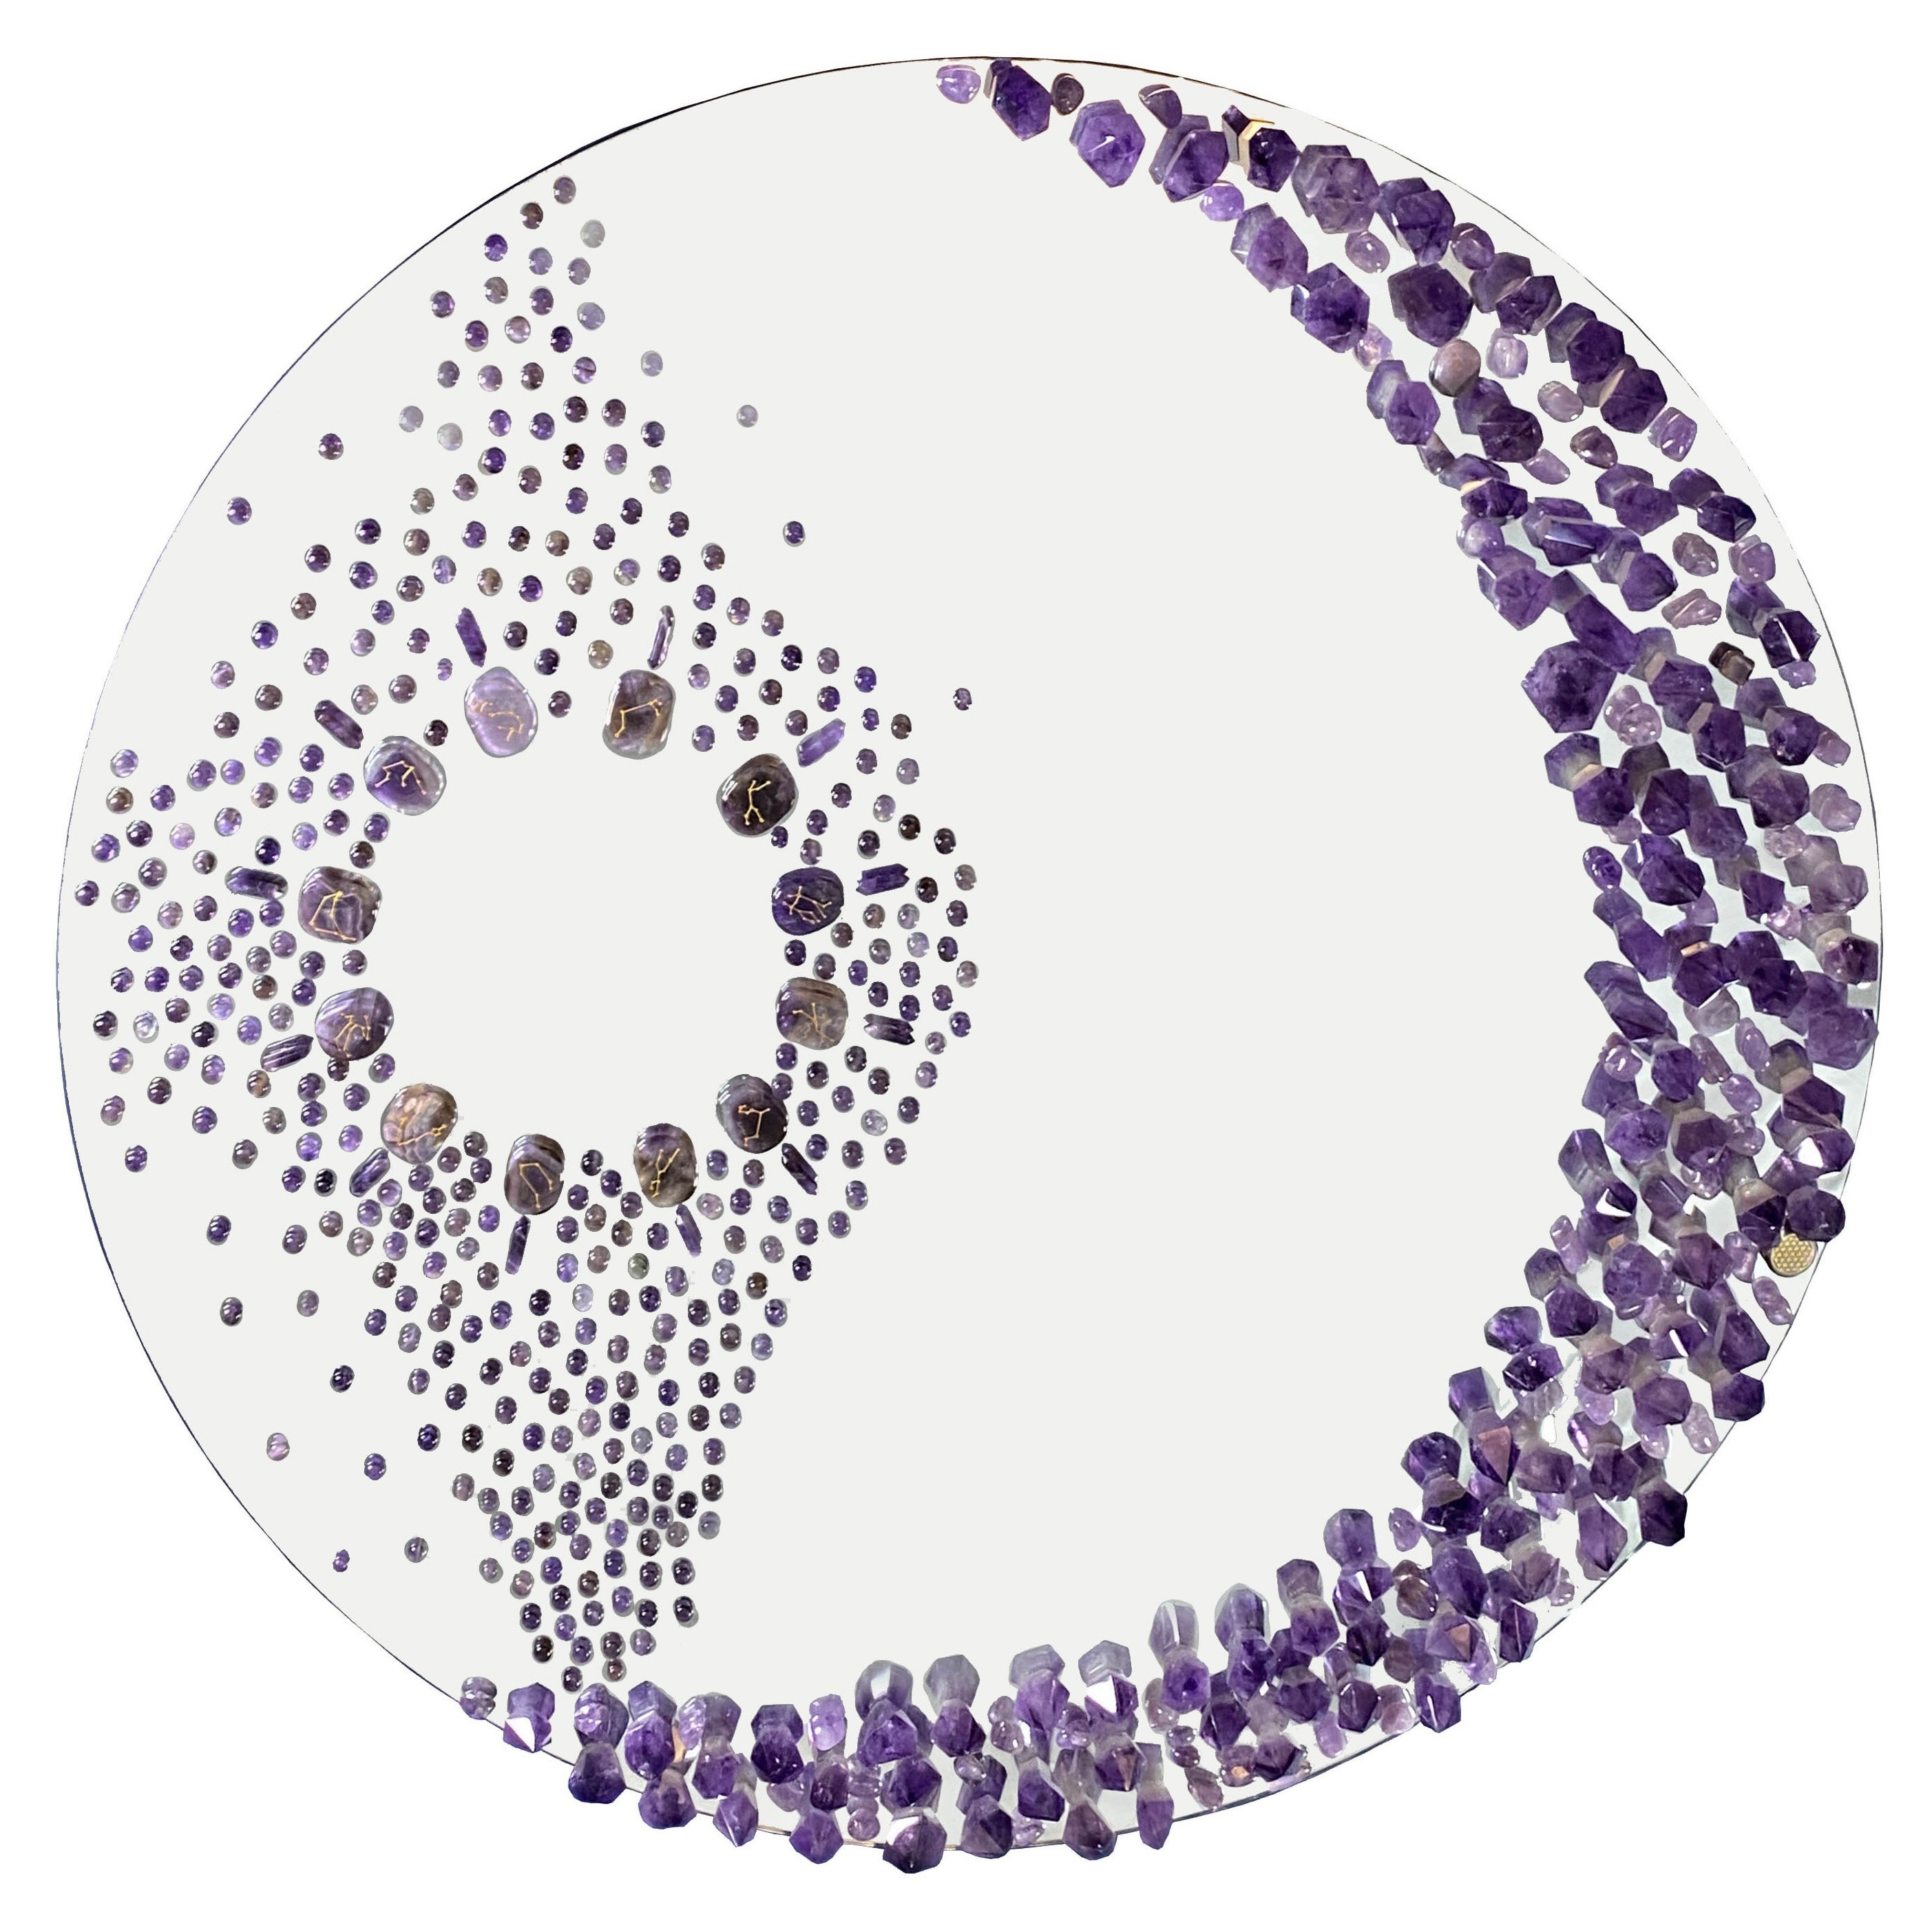 Wall Mirror, Adorned with 635 Amethysts, Handmade by Aline Erbeia